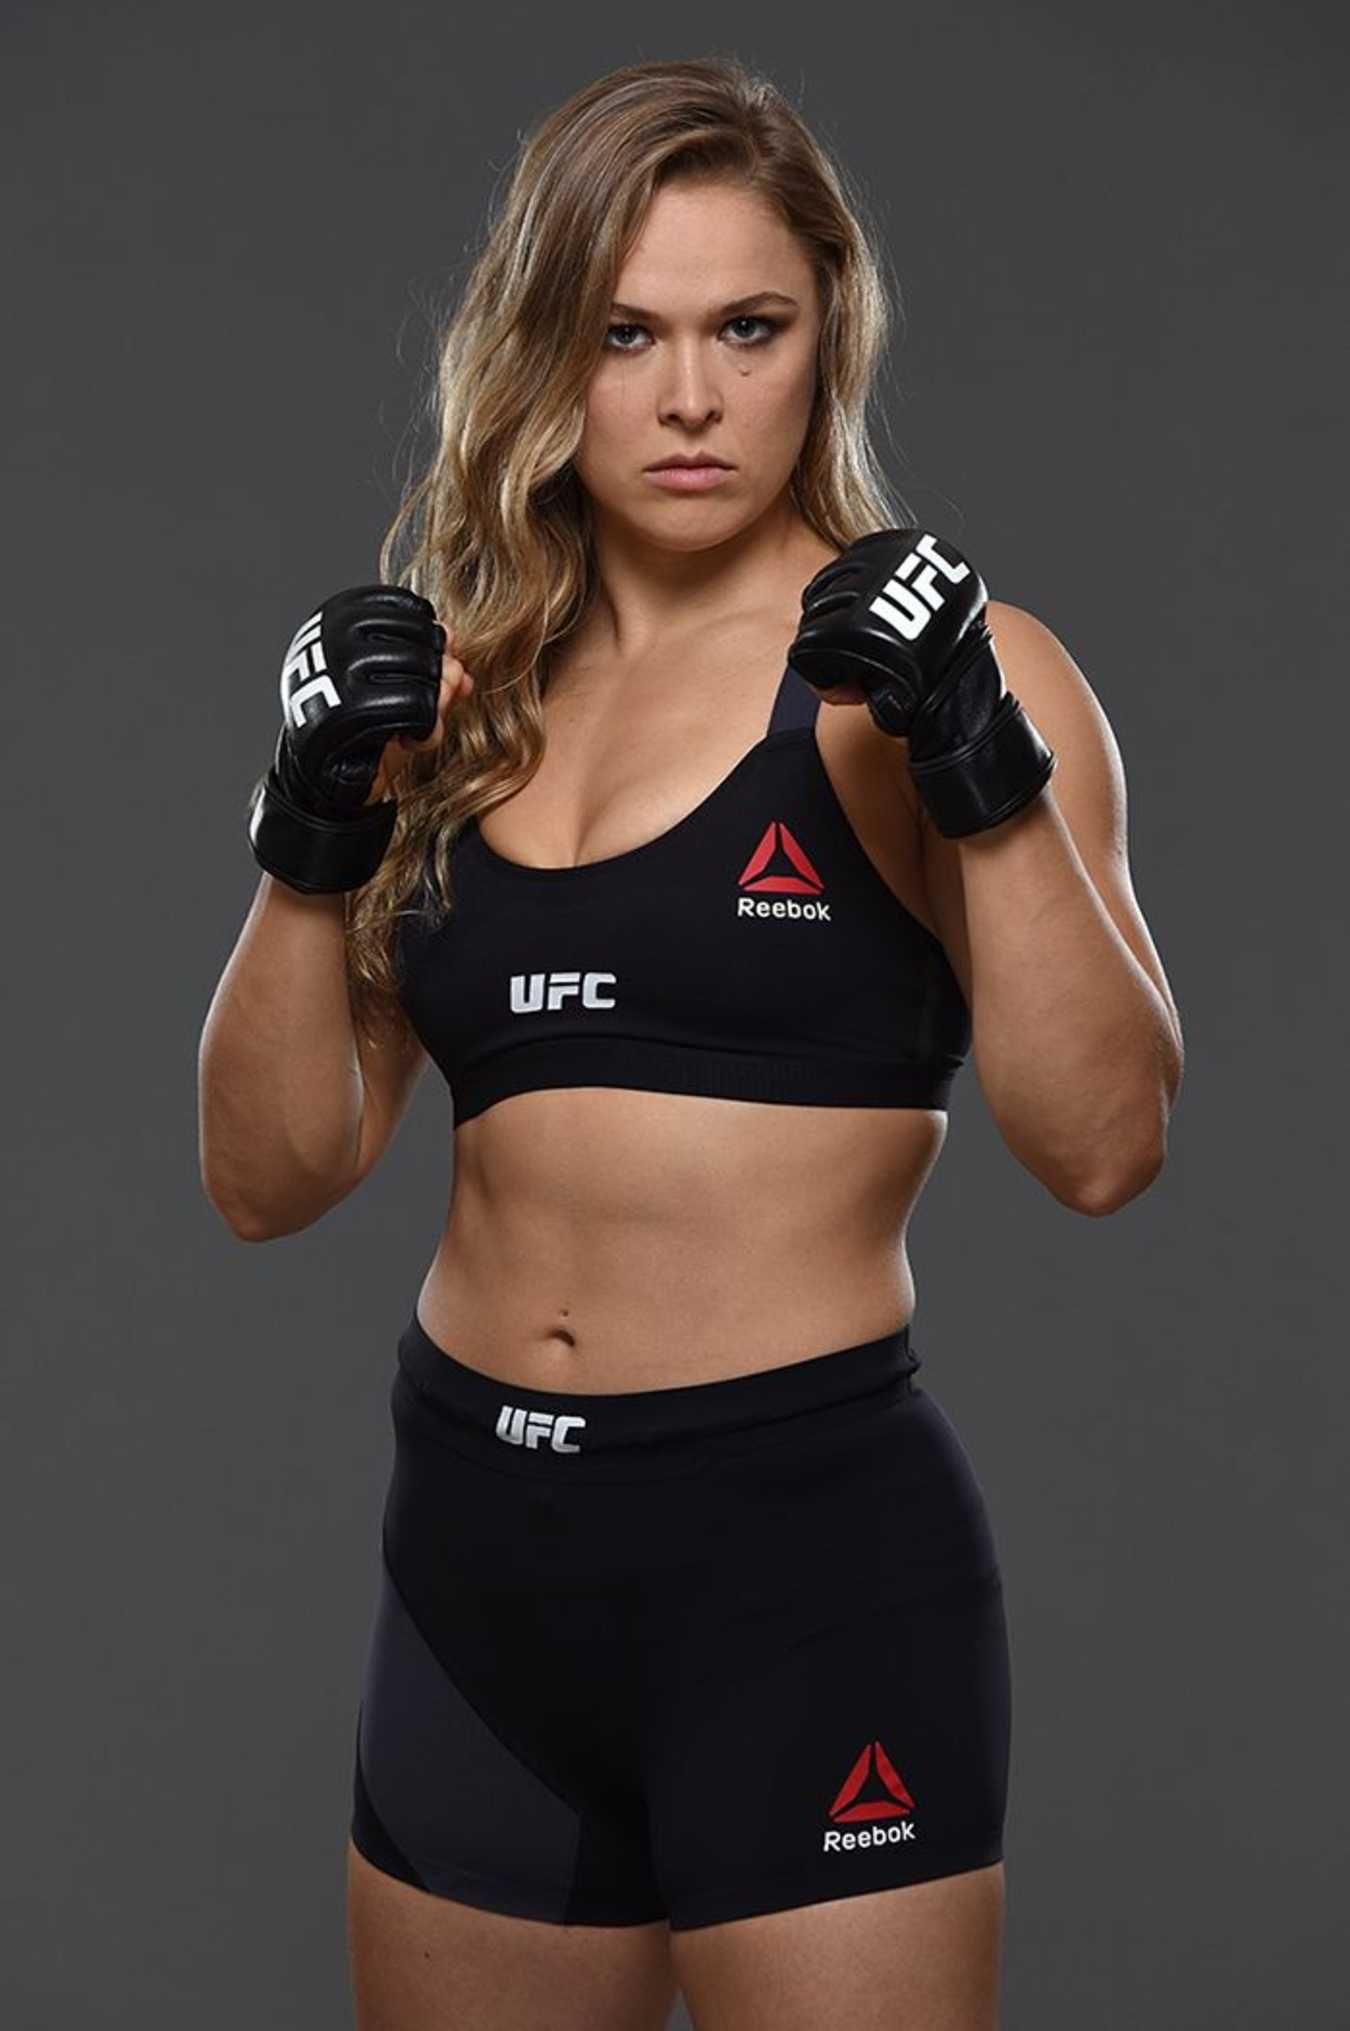 Ronda Rousey's Physical Appearance: